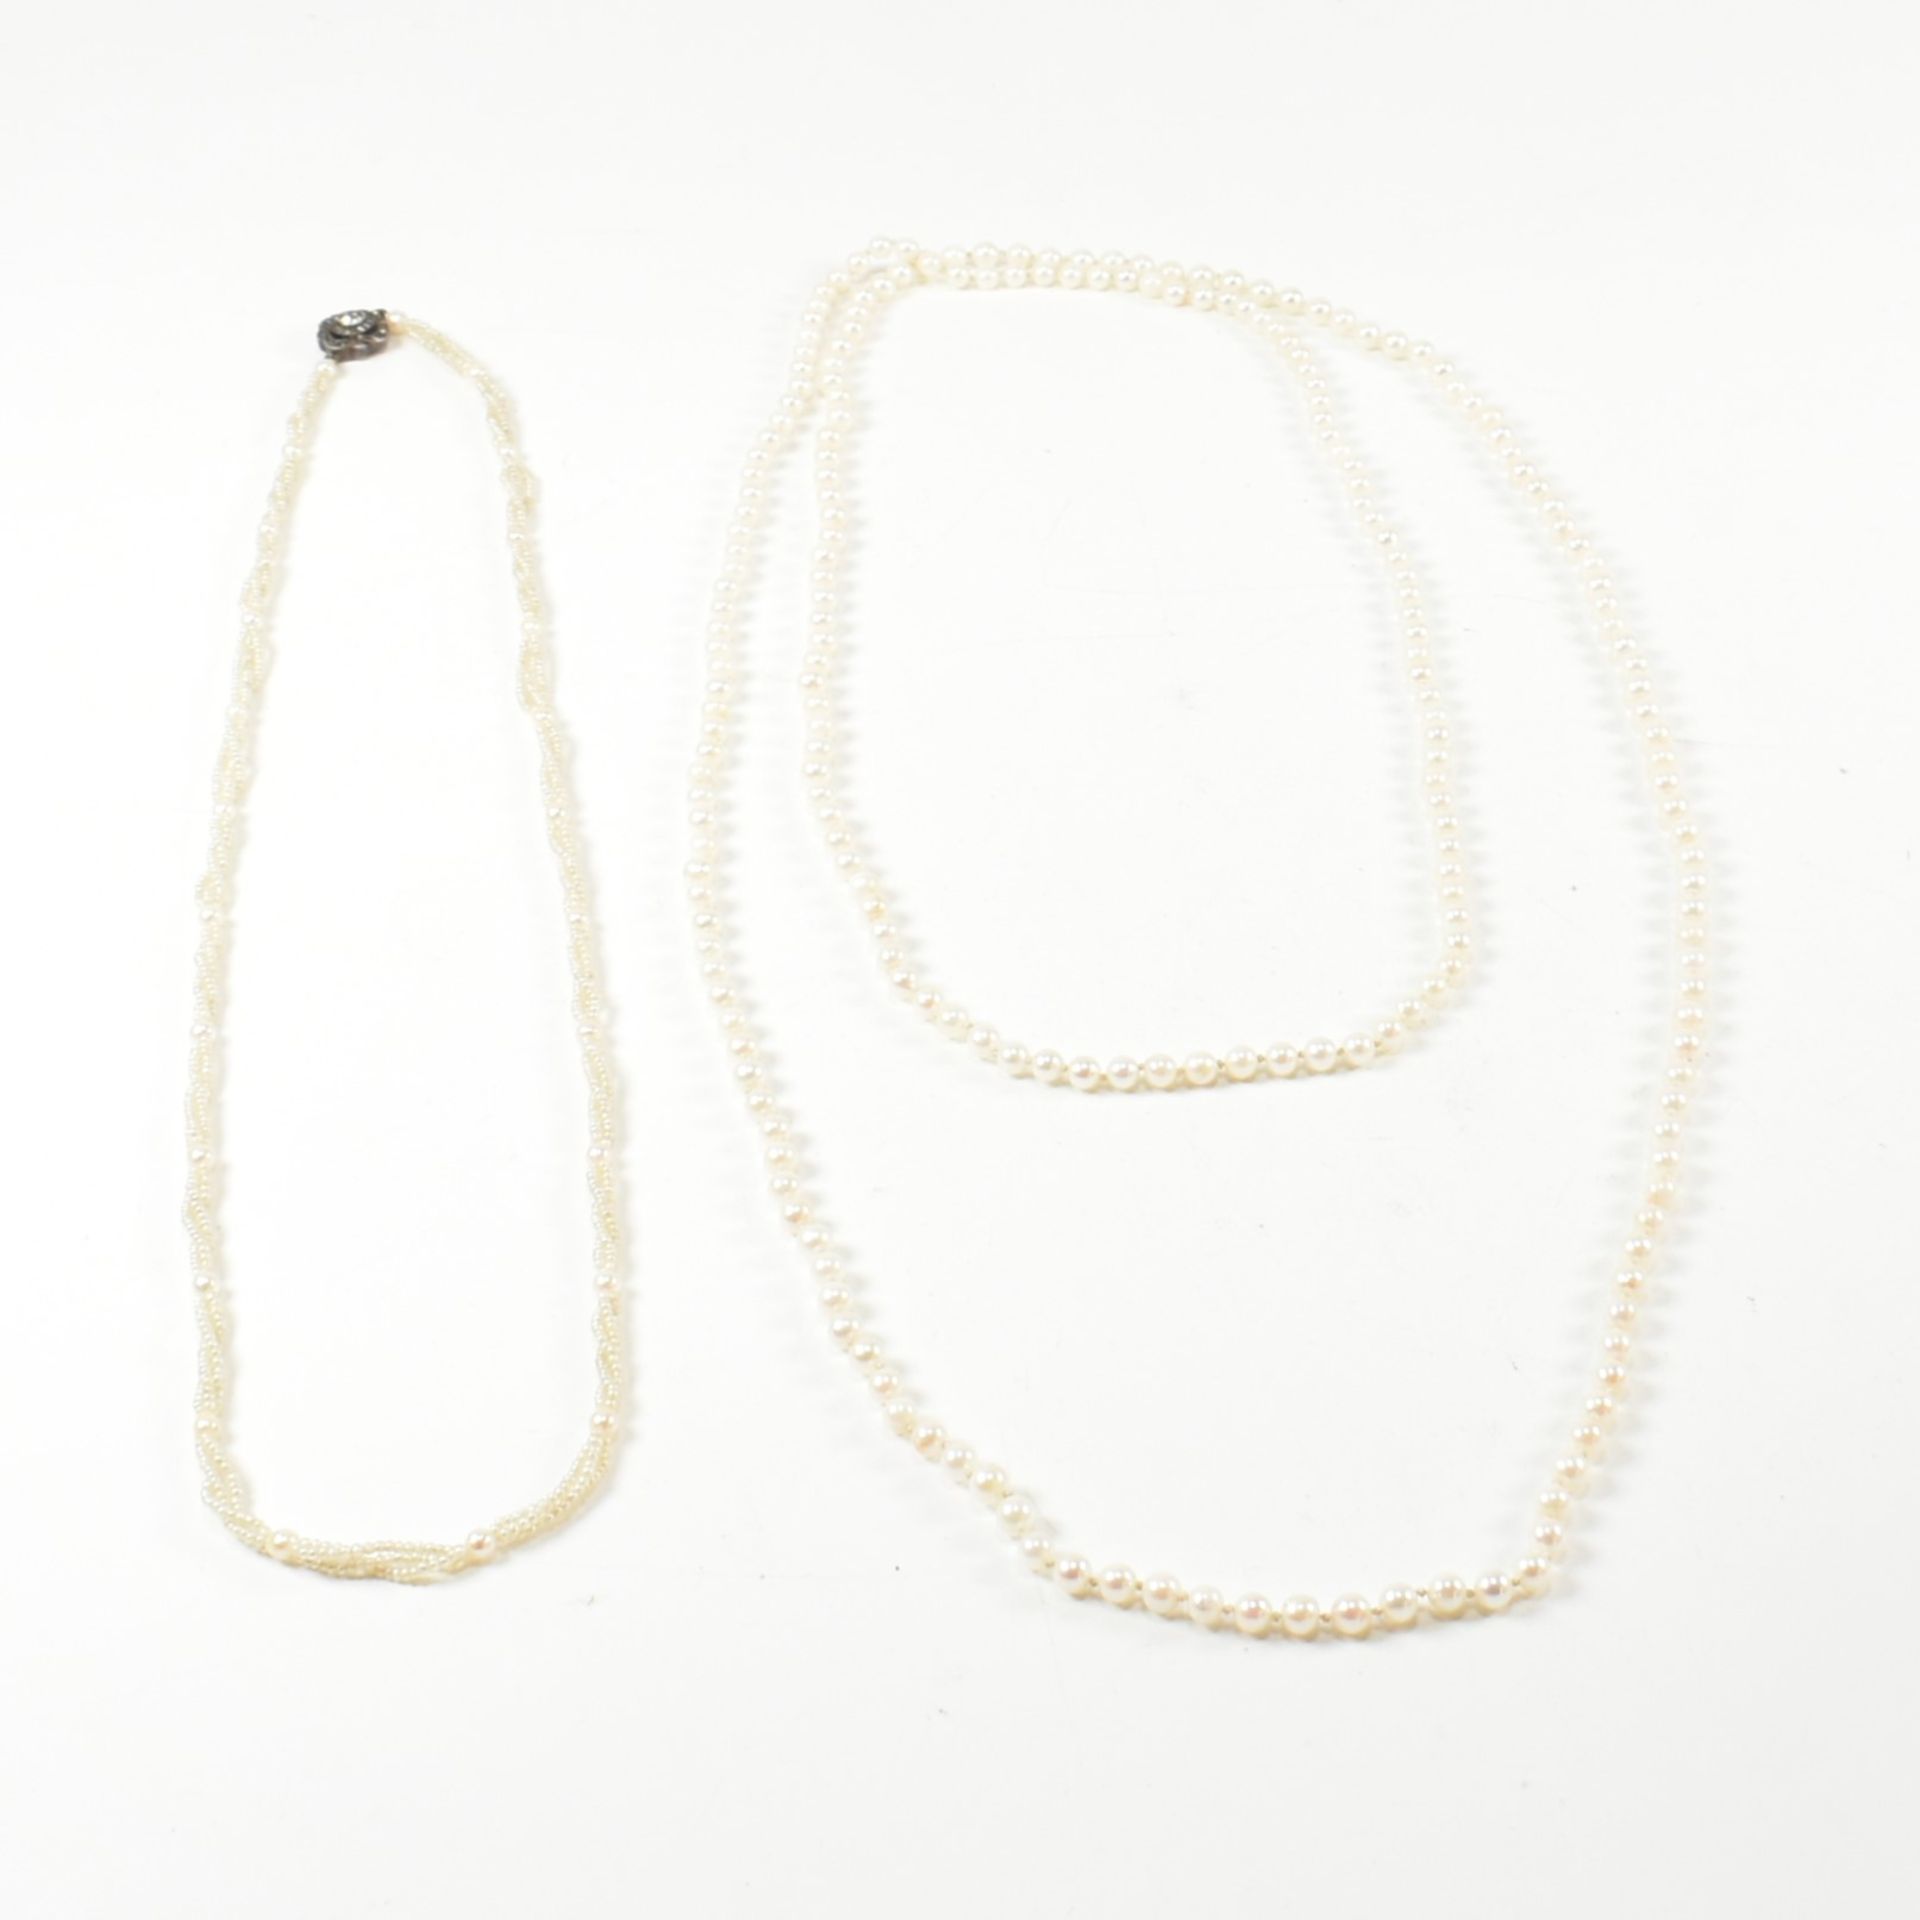 TWO PEARL NECKLACES - Image 4 of 6